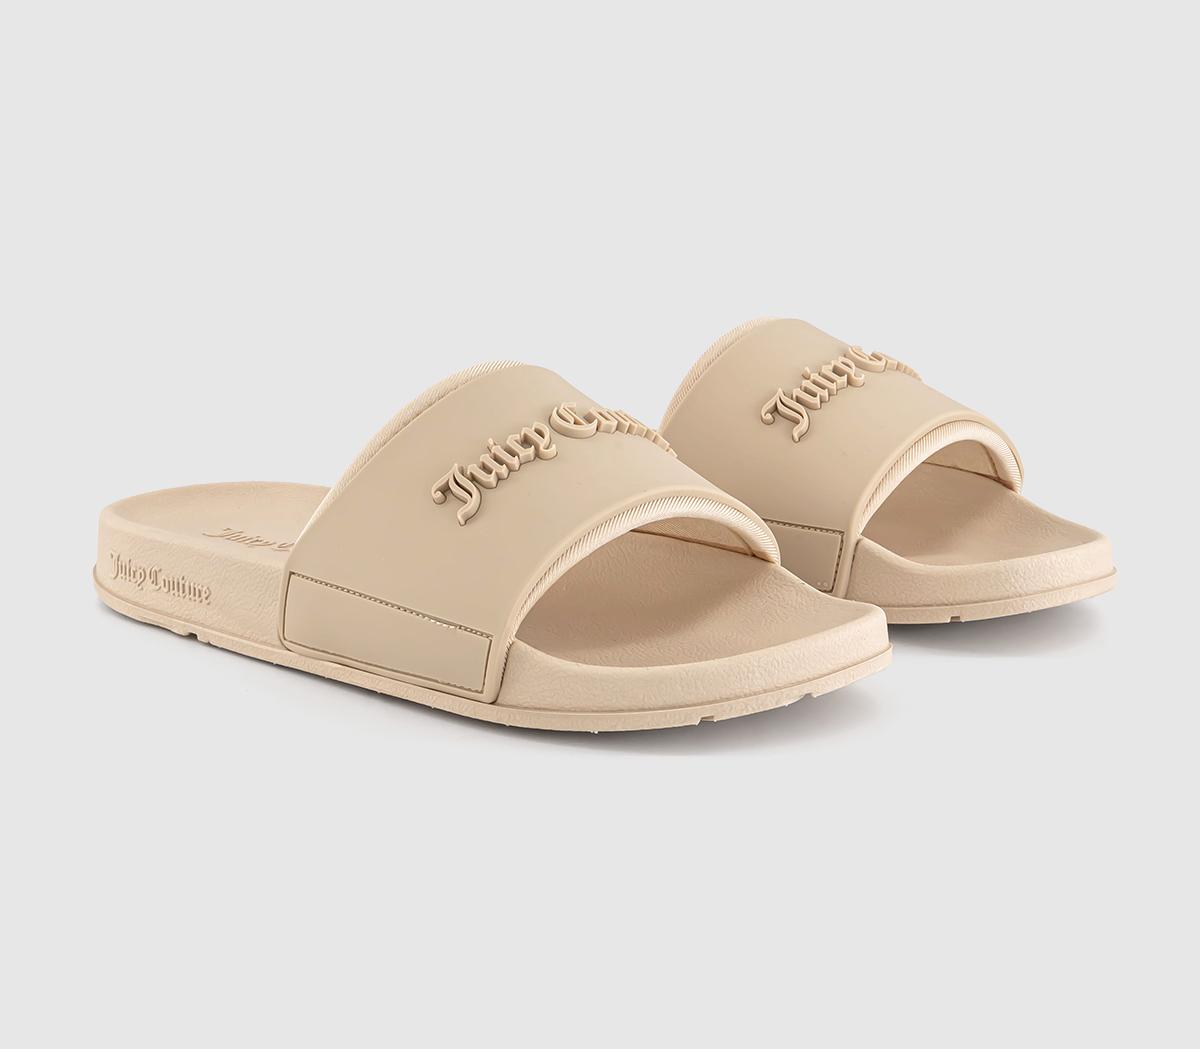 Juicy Couture Womens Breanna Debossed Sliders Brazilian Sand Natural, 3